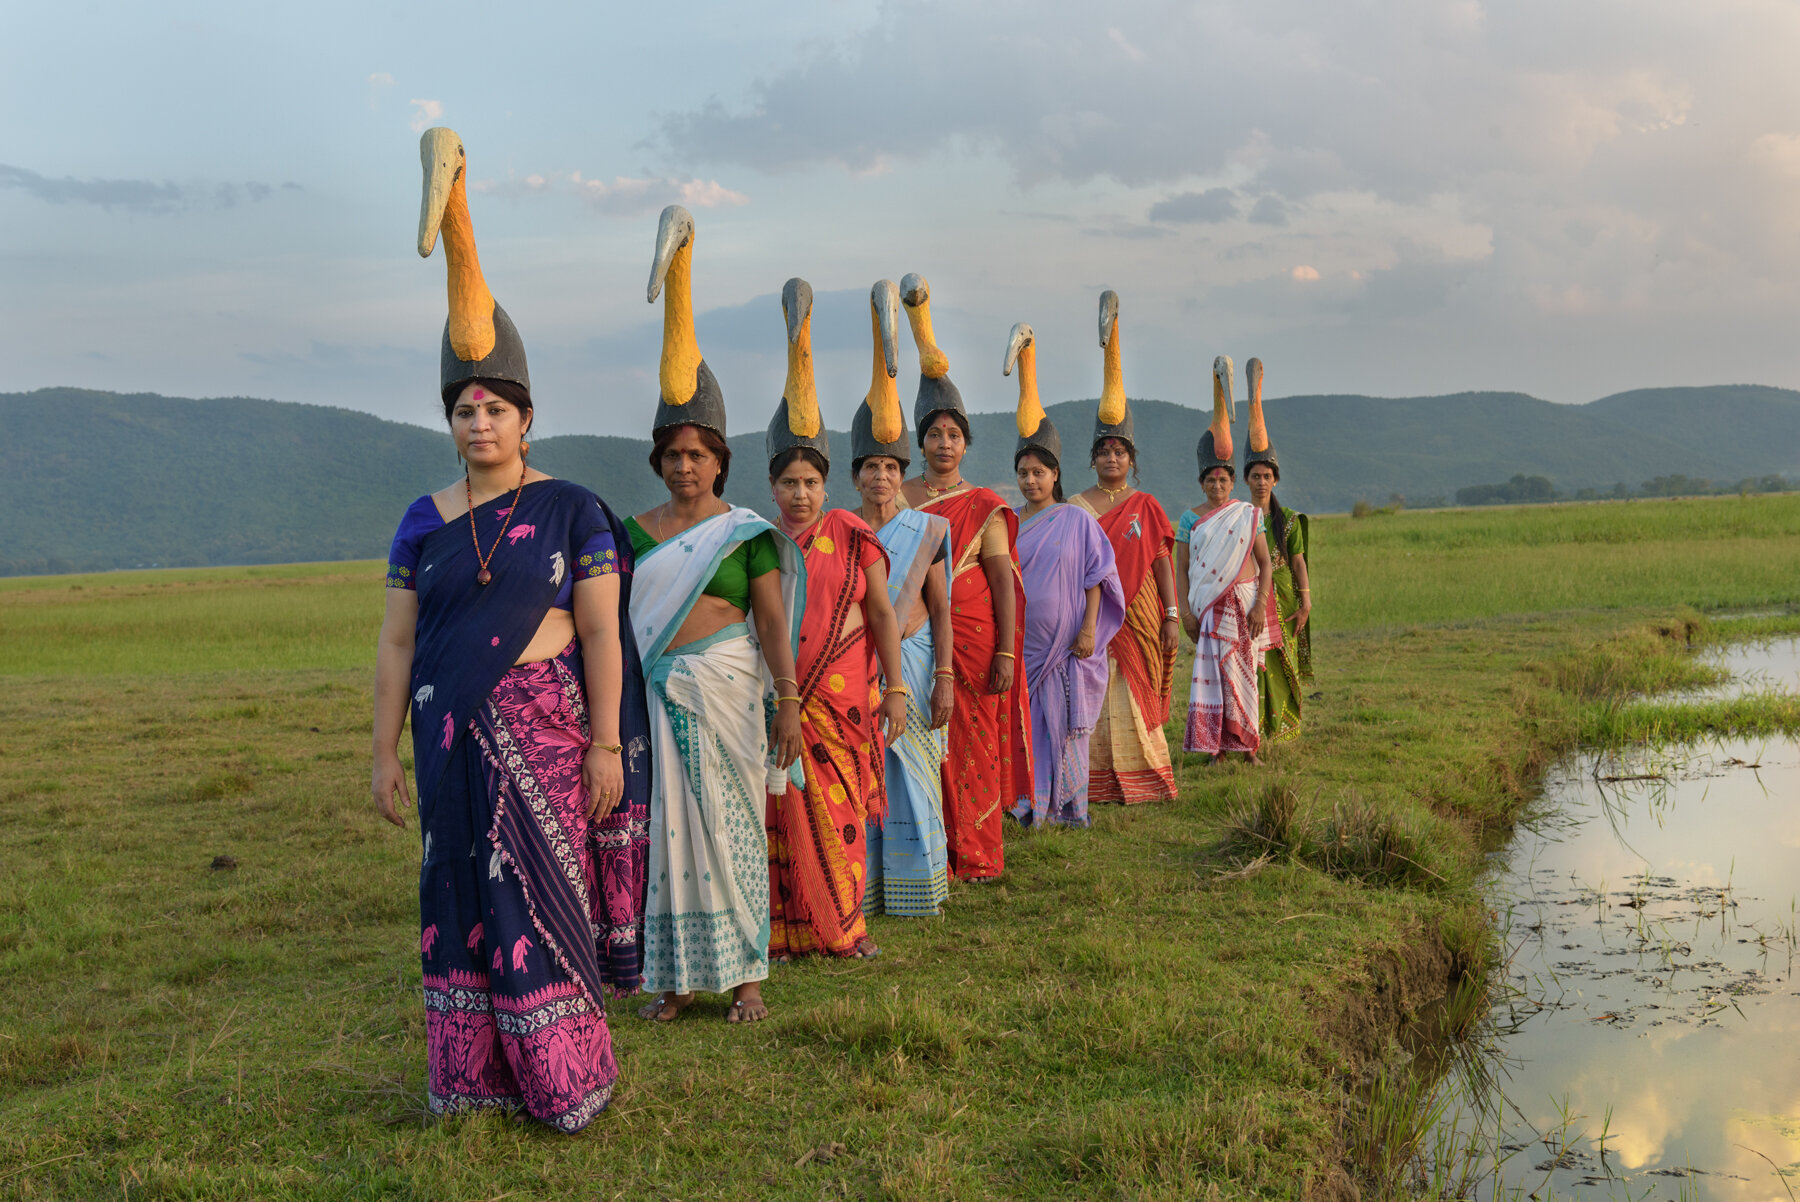  Members of the all-women Hargila Army led by biologist Purnima Barman sport stork masks and pose for a portrait at Dadara village in Assam, India. The group with more than 400 members are fighting to save the endangered Greater Adjutant Stork.  The 